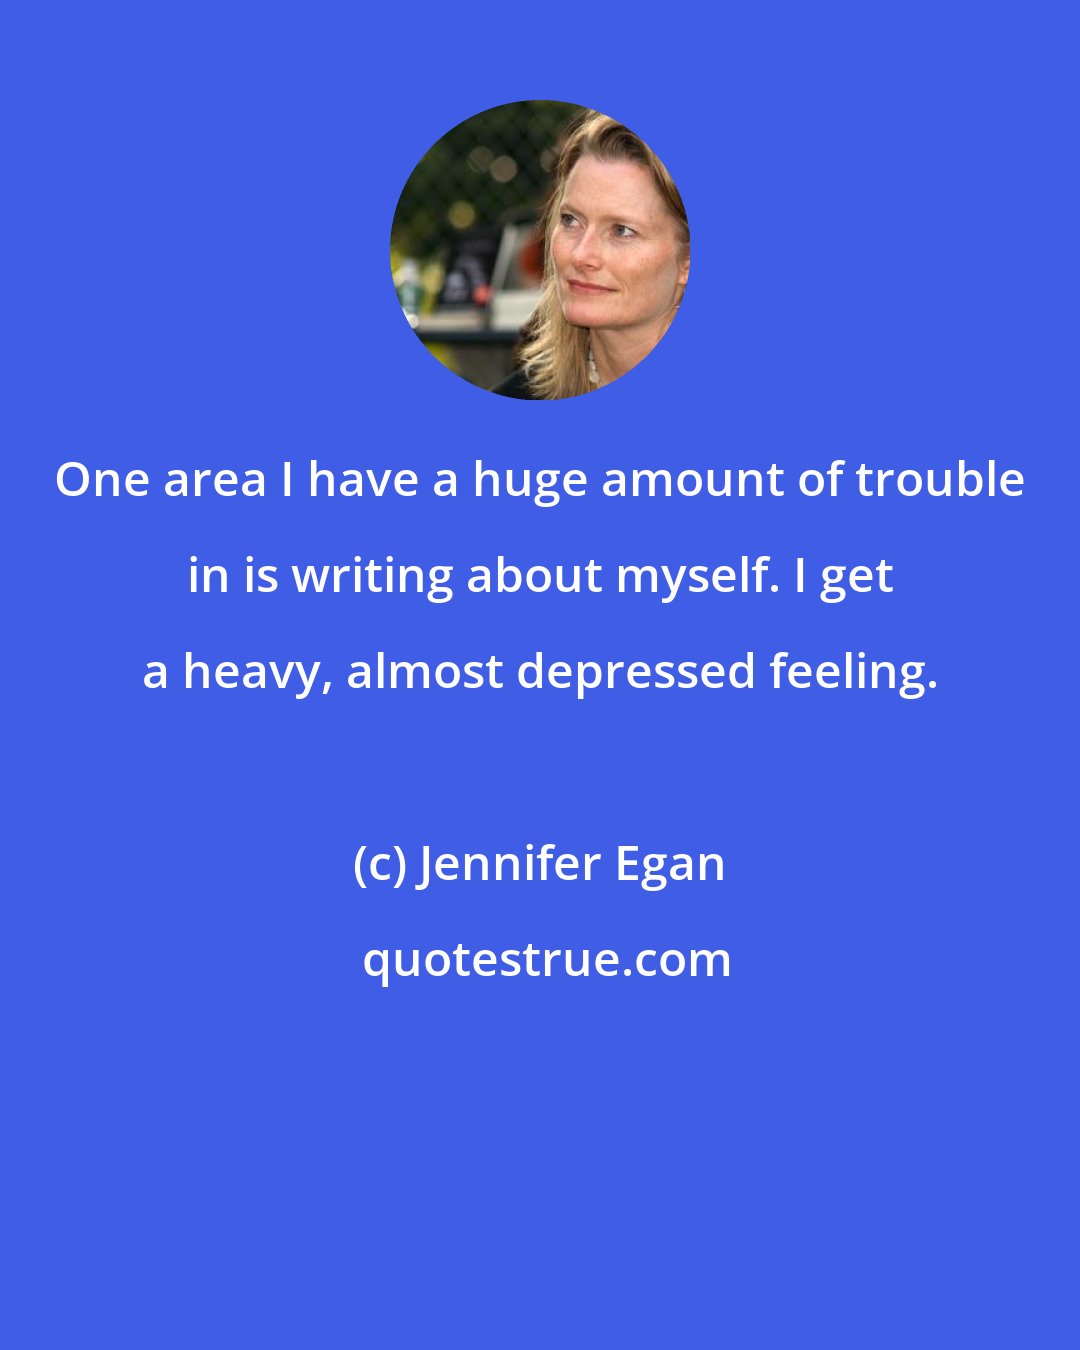 Jennifer Egan: One area I have a huge amount of trouble in is writing about myself. I get a heavy, almost depressed feeling.